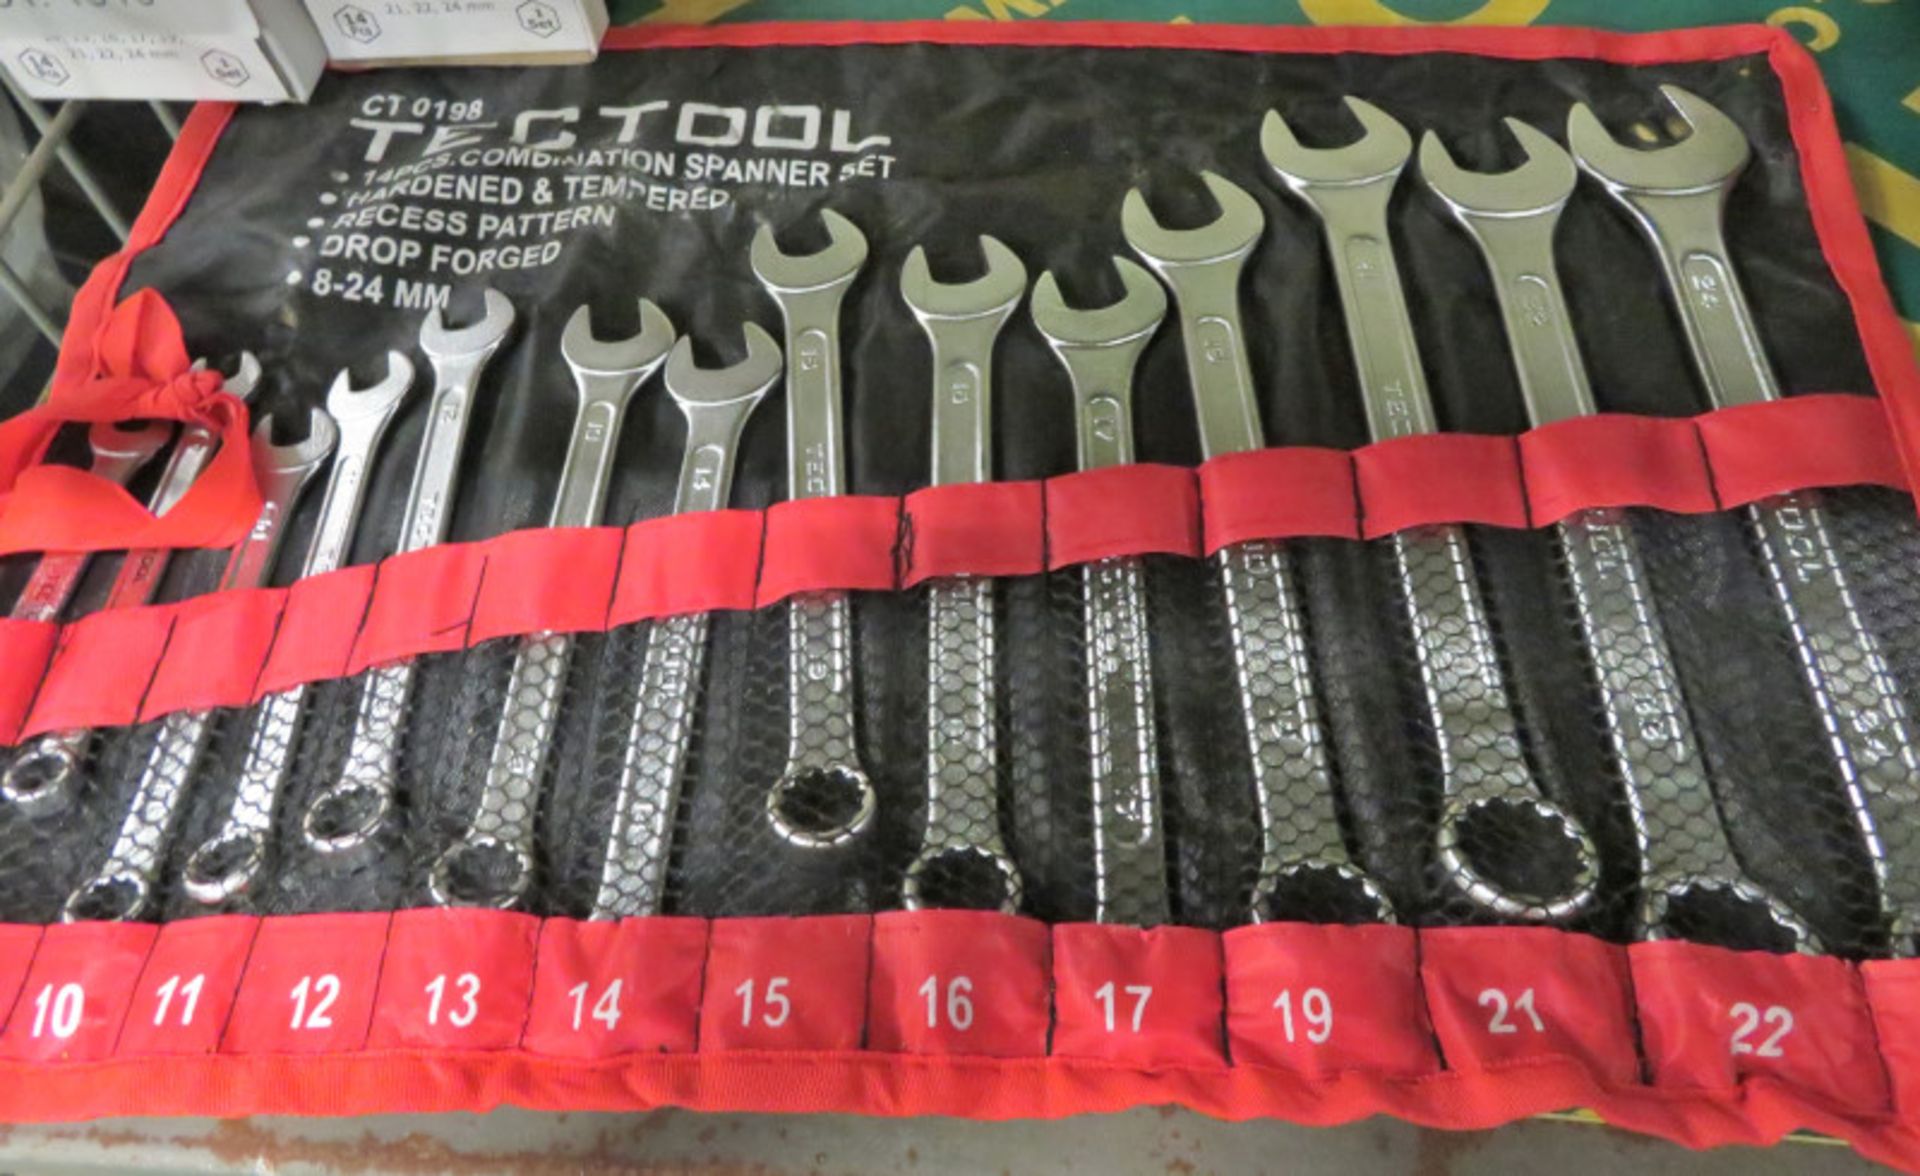 Tectool Combination spanner set - 14 piece - CT0198 - Image 2 of 2